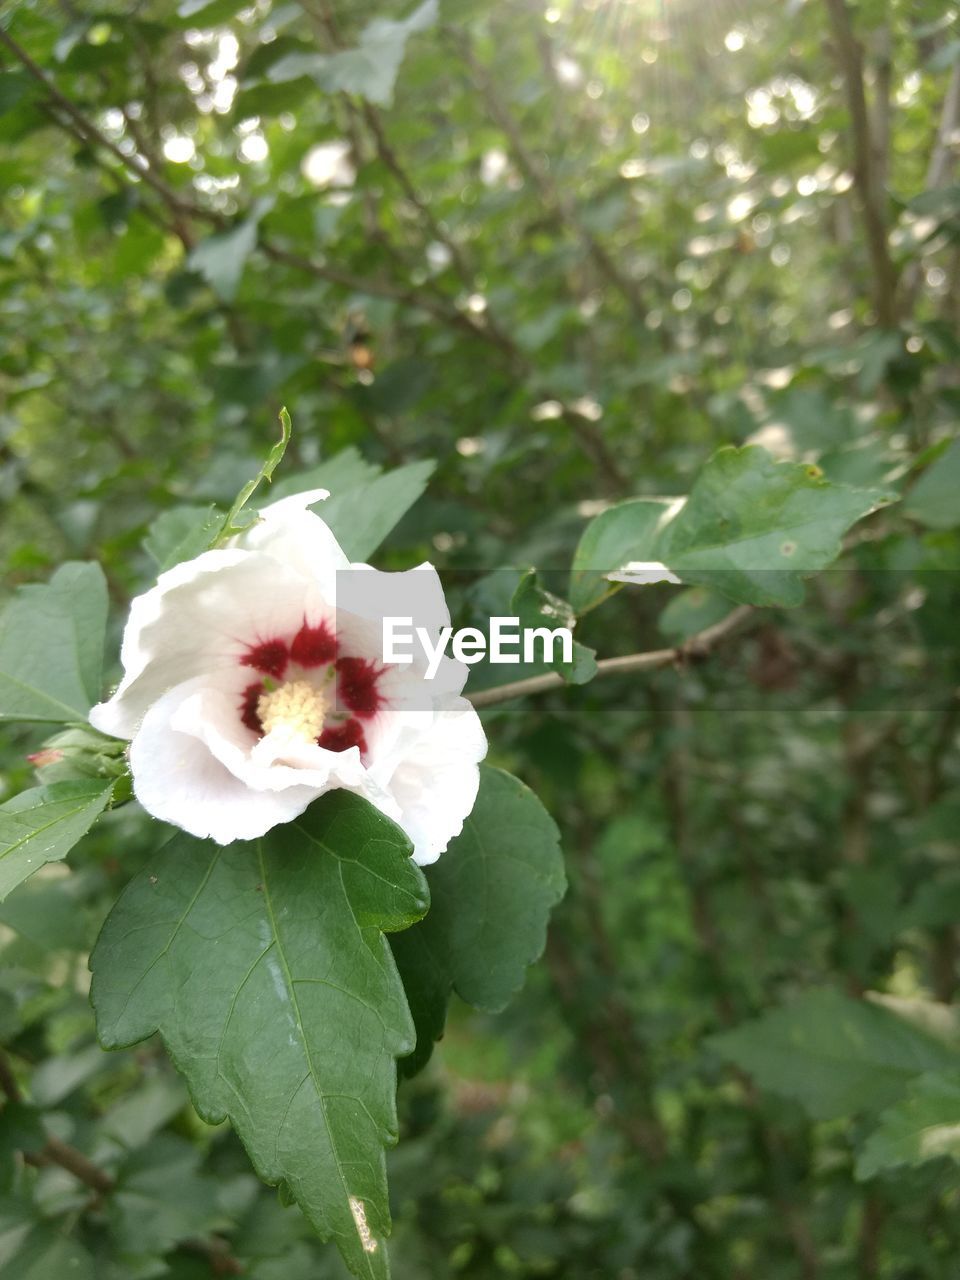 CLOSE-UP OF WHITE FLOWER BLOOMING AGAINST TREES